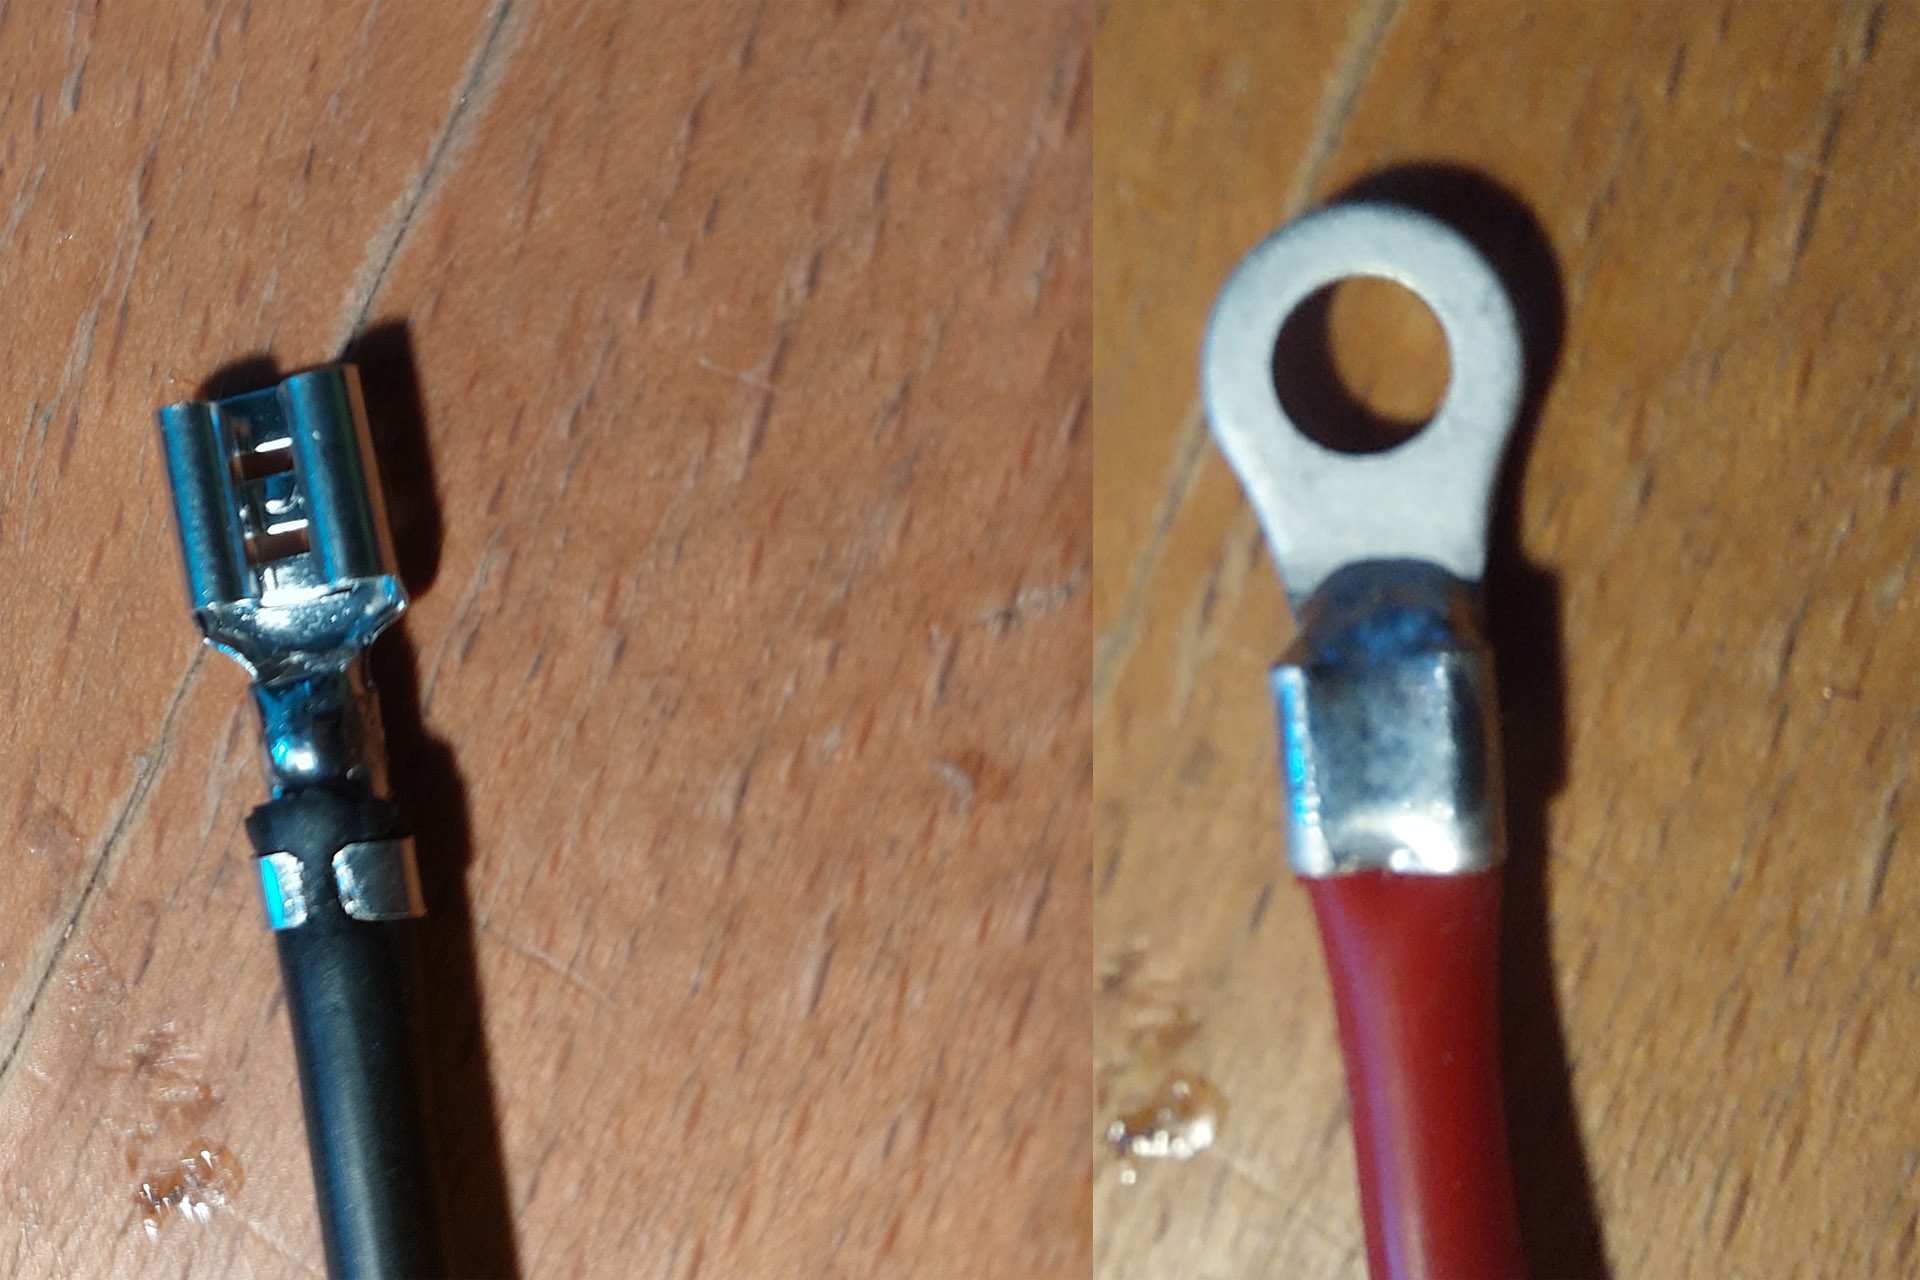 Crimped and soldered connectors